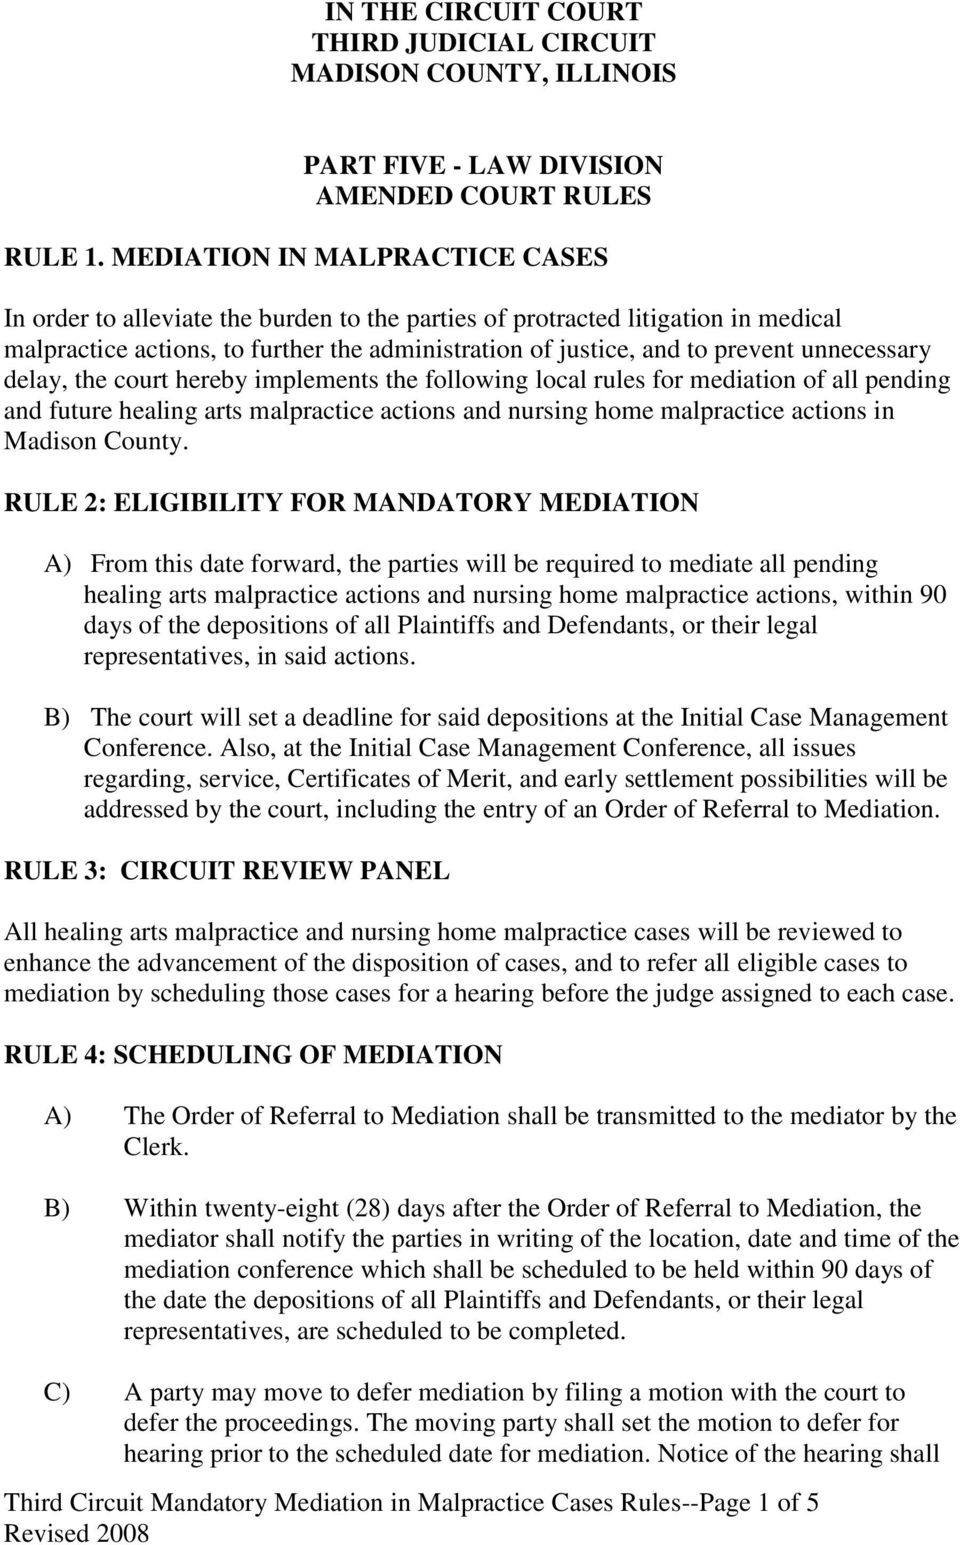 unnecessary delay, the court hereby implements the following local rules for mediation of all pending and future healing arts malpractice actions and nursing home malpractice actions in Madison